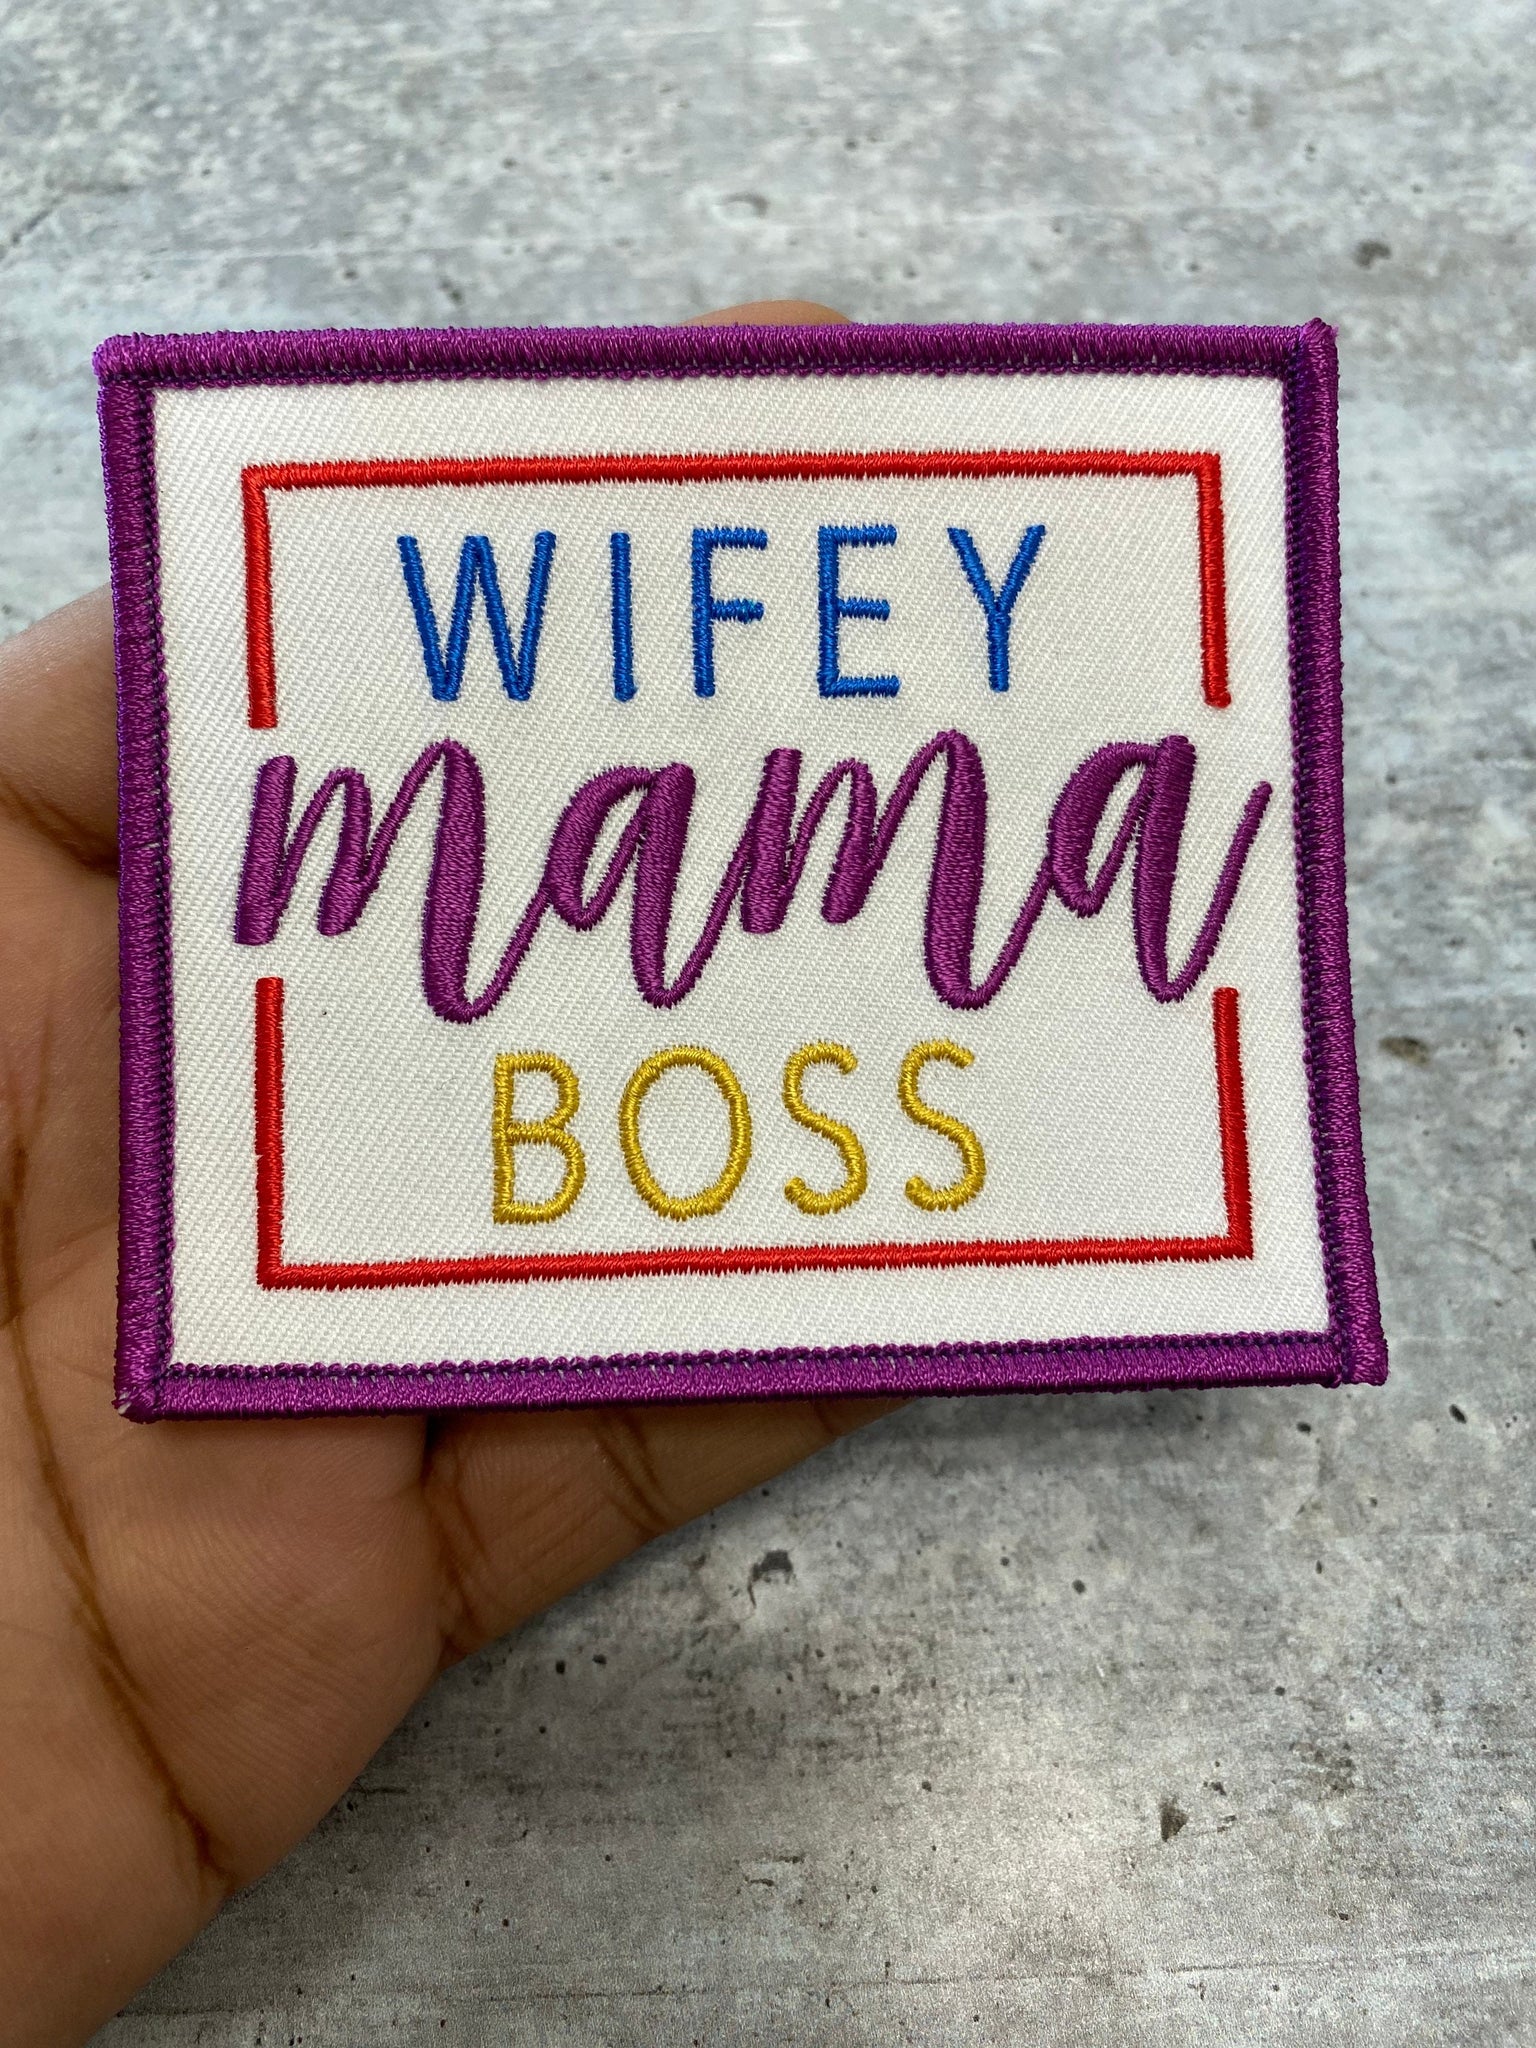 NEW, "Wifey, Mama, Boss" (Purple, Red, Yellow) Iron-on Patch for Denim Jackets, Hats, and Bags, Small Jacket Patch, 4"x4", Craft Supplies